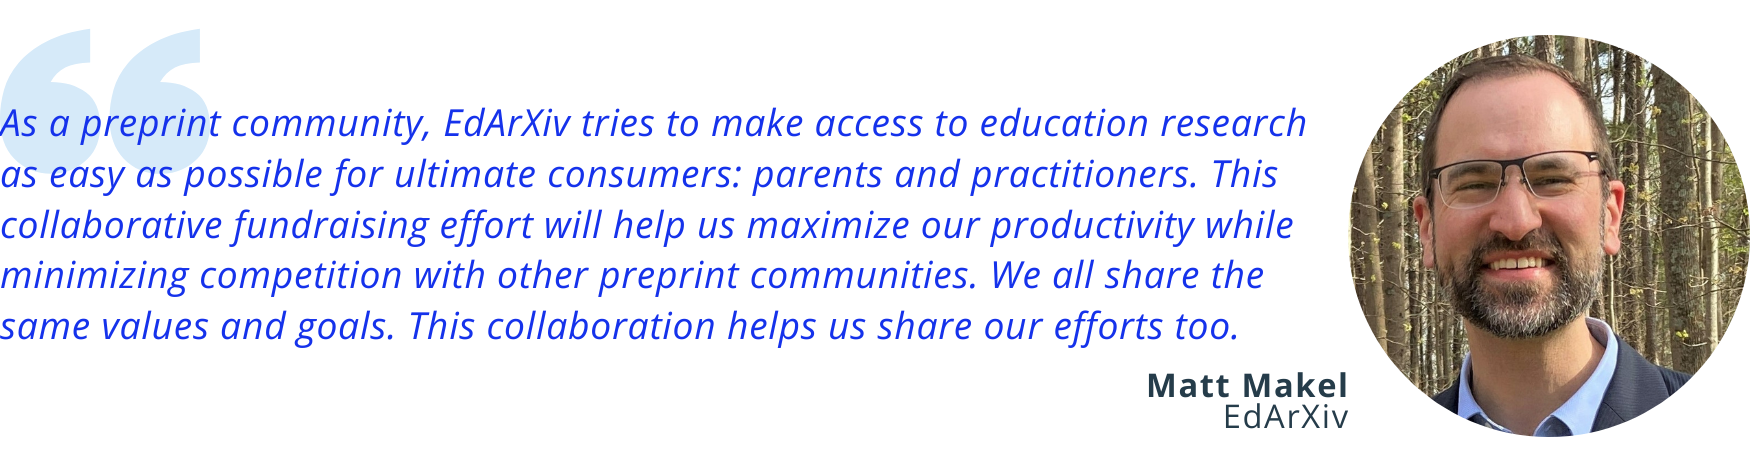 Image of a quote from Matt Makel of EdArXiv: “As a preprint community, EdArXiv tries to make access to education research as easy as possible for ultimate consumers: parents and practitioners. This collaborative fundraising effort will help us maximize our productivity while minimizing competition with other preprint communities. We all share the same values and goals. This collaboration helps us share our efforts too.”